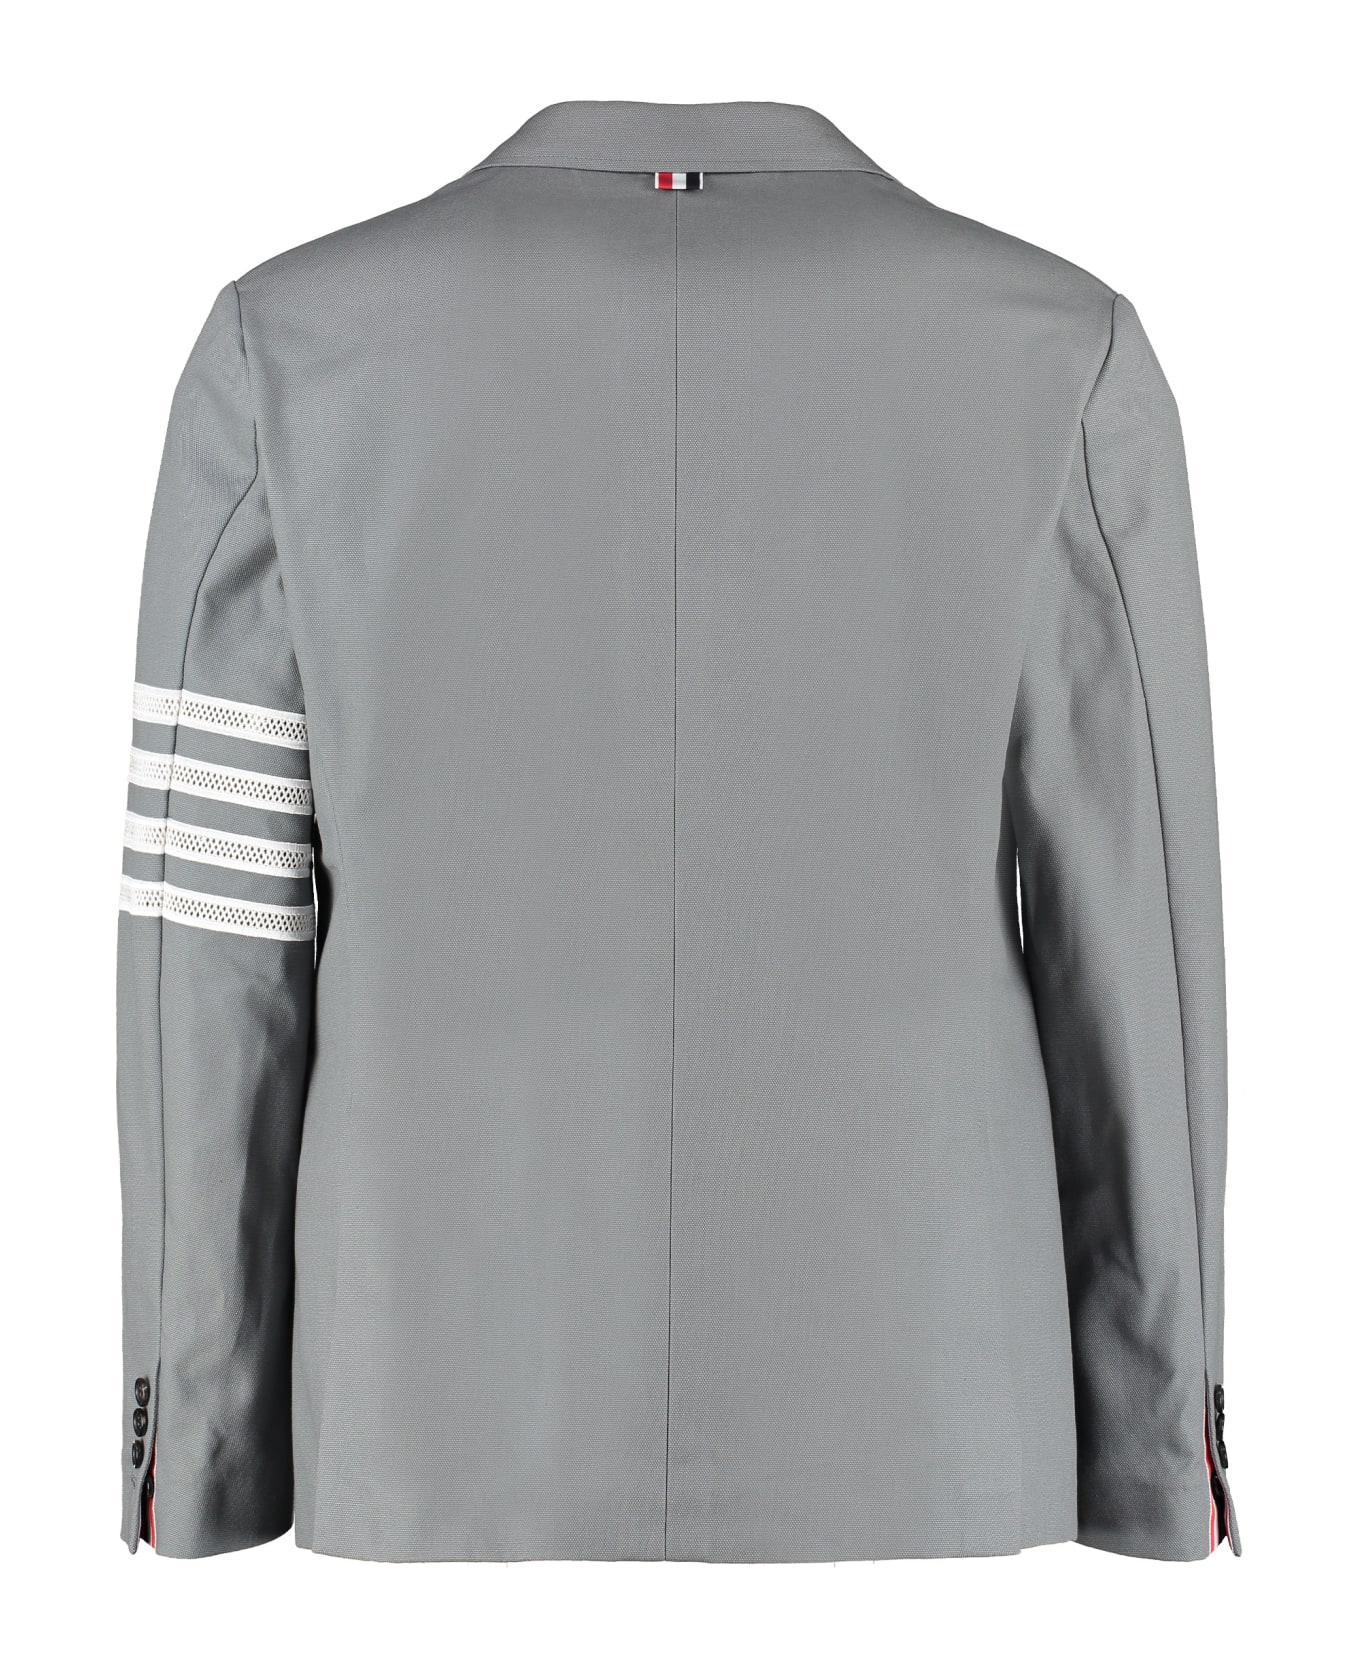 Thom Browne Single-breasted Two Button Jacket - grey